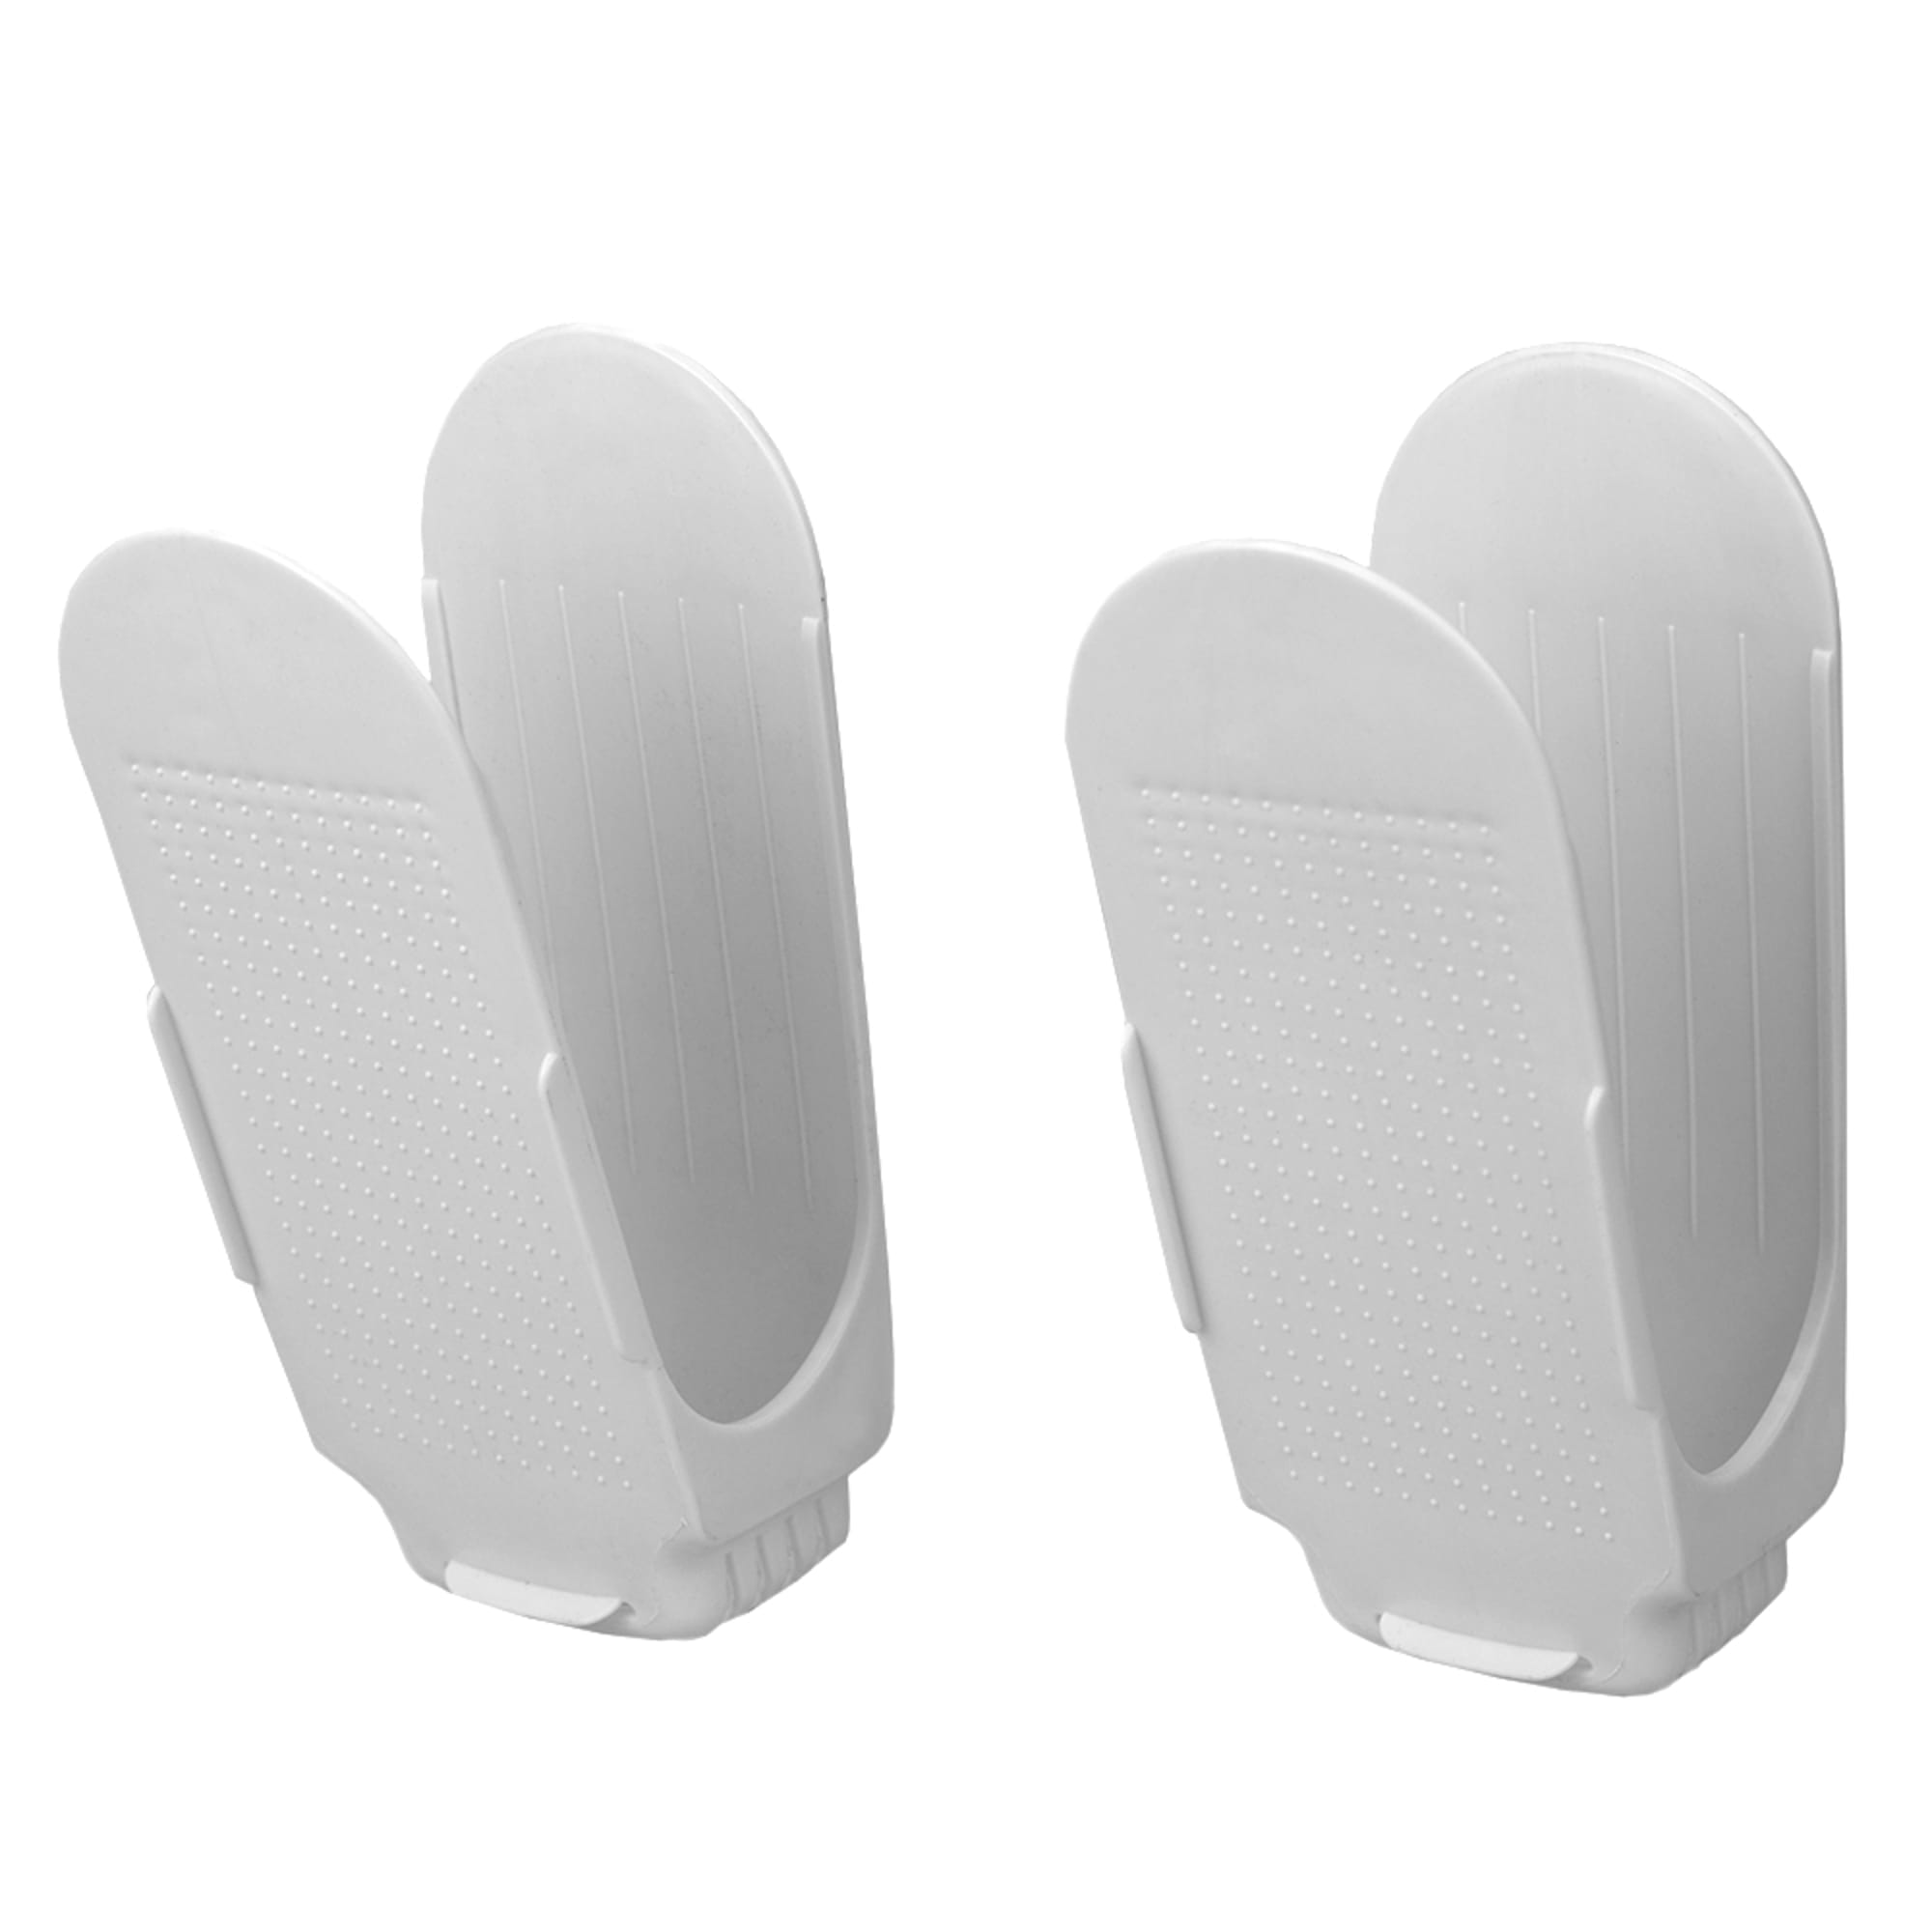 Home Basics Plastic Shoe Space Saver, White $4.00 EACH, CASE PACK OF 12